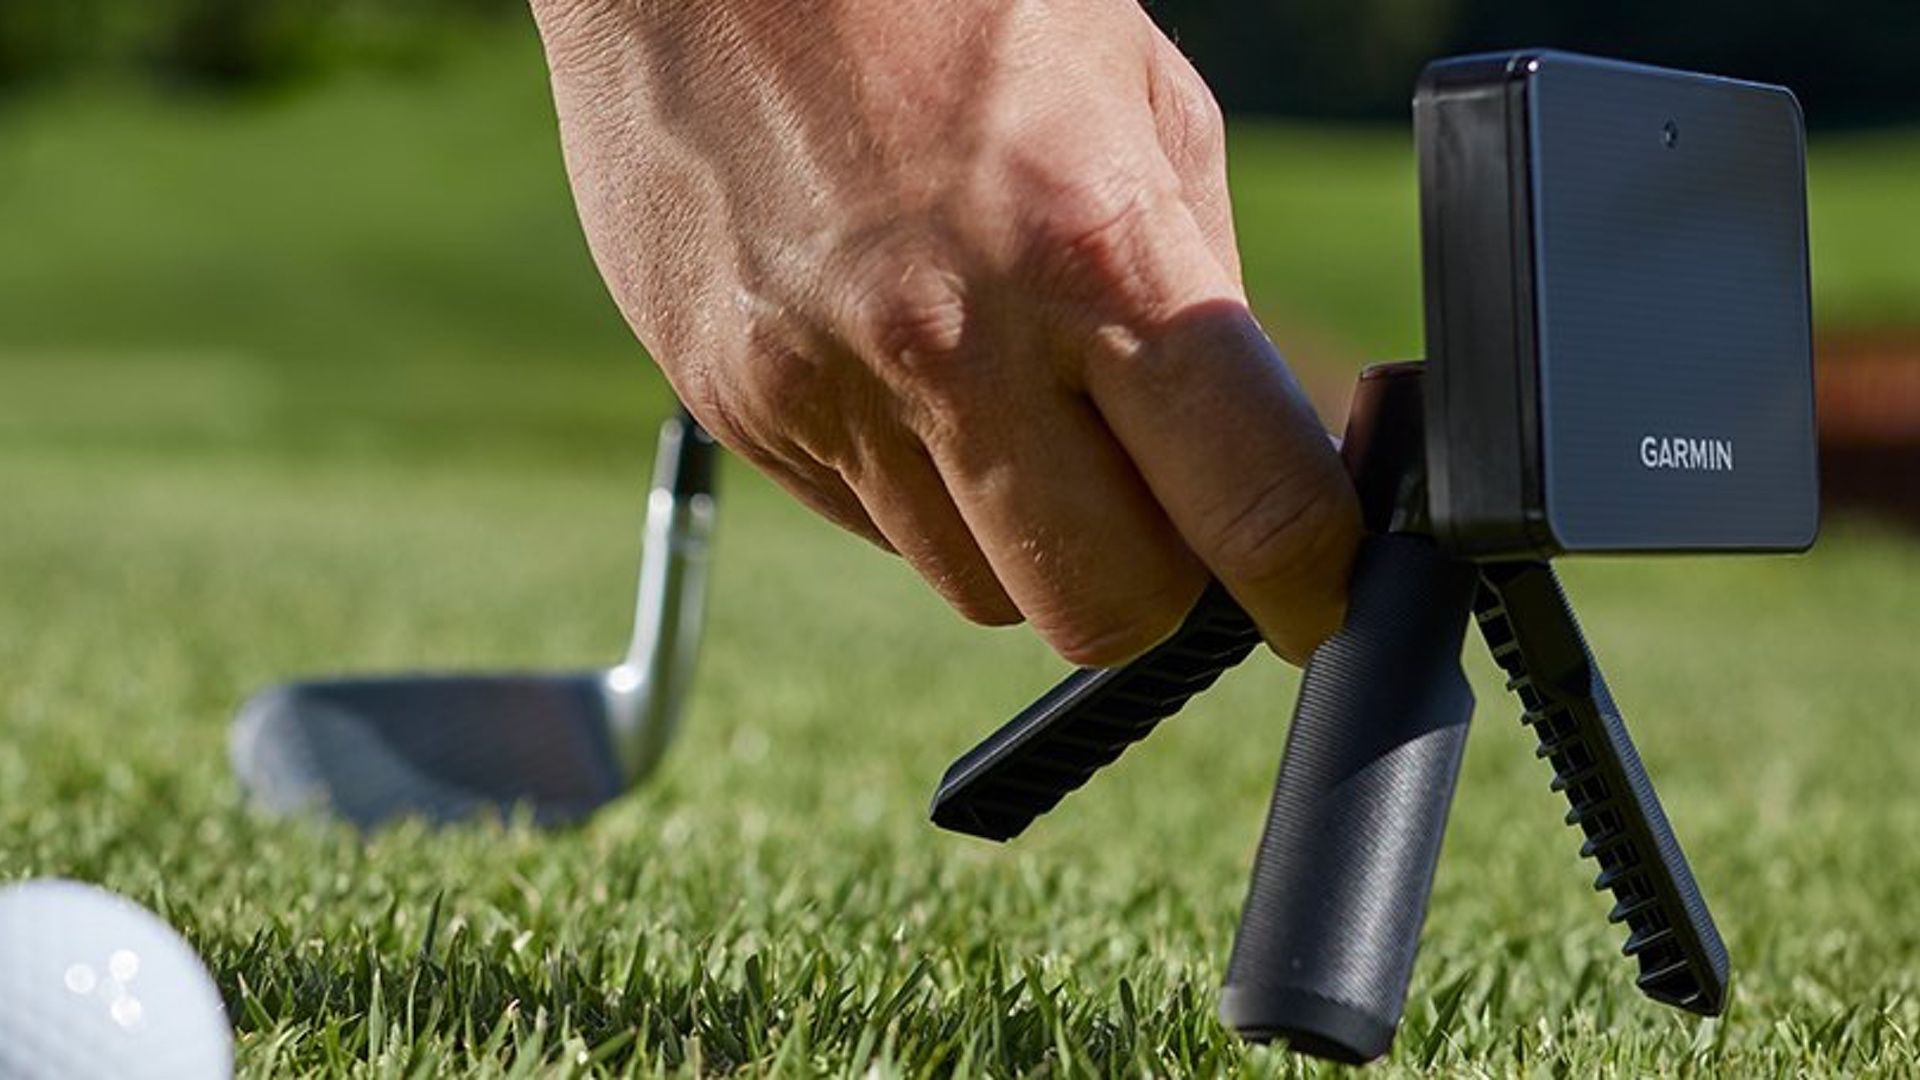 Garmin Approach R10 portable launch monitor lets golfers track their practice from home, the range or outdoors photo 4